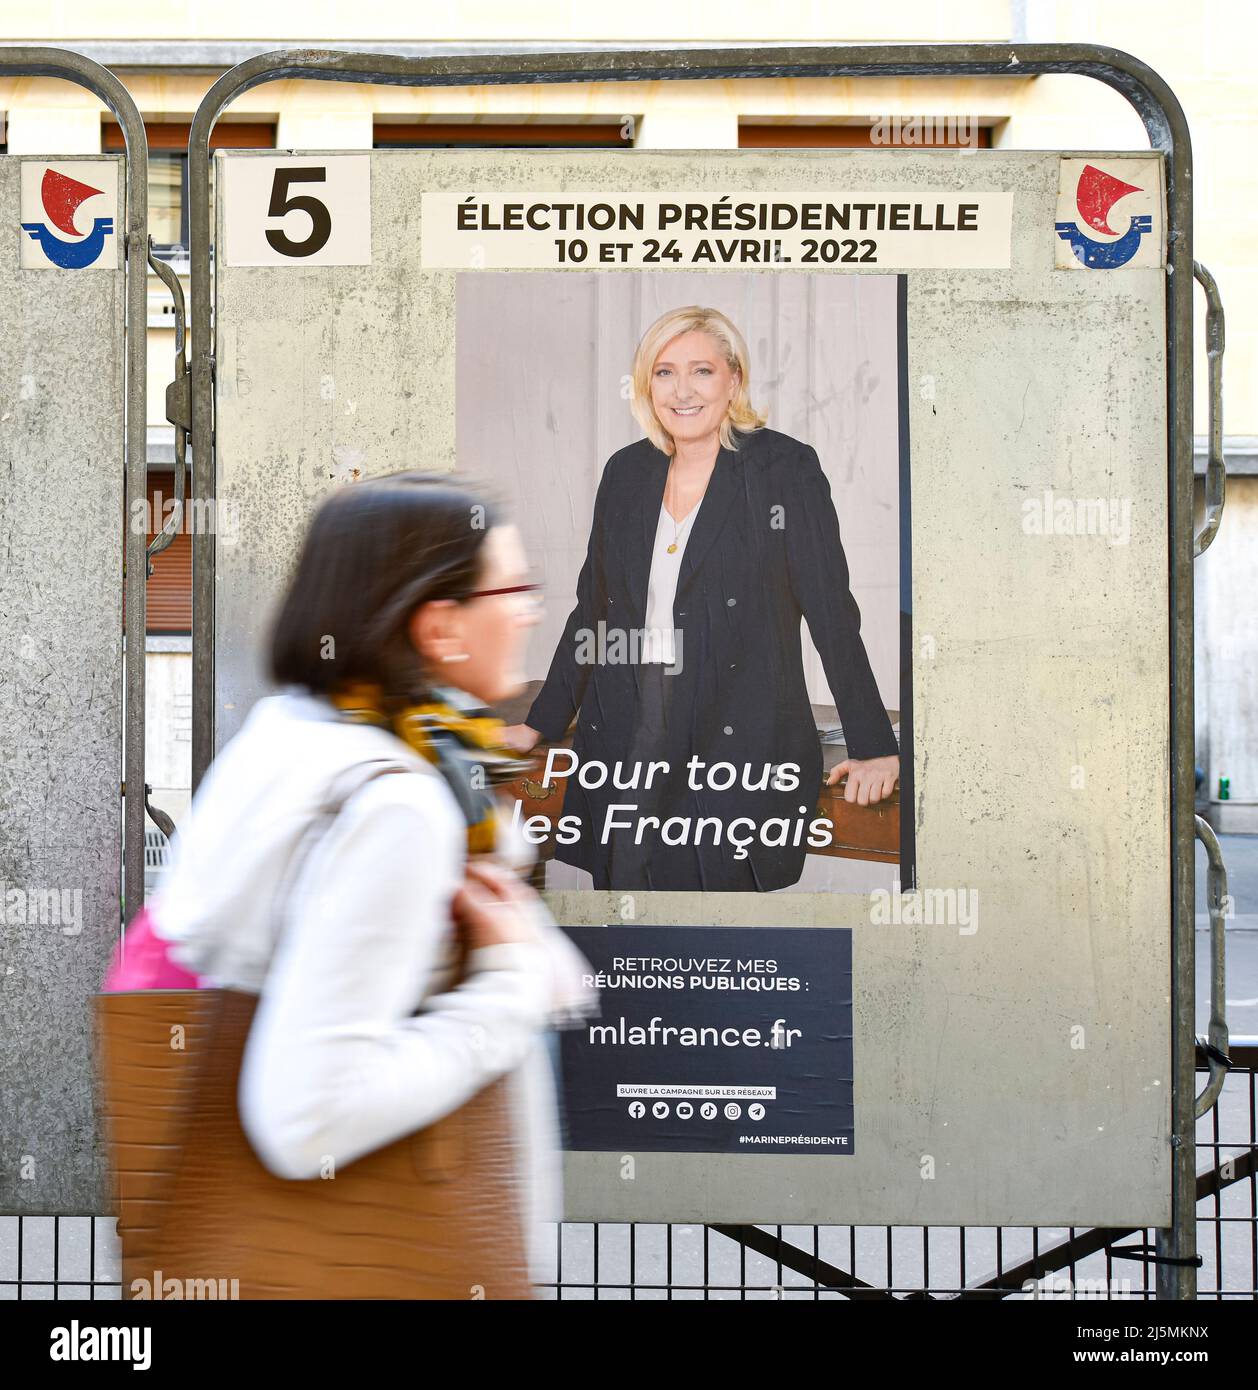 Paris, France. 24th Apr, 2022. A pedestrian passes official campaign posters on an electoral billboard (sign). Presidential posters on their electoral boards. Illustration picture on April 24, 2022 in Paris, France. French voters head to the polls to vote for the second round of the presidential election, to elect their new president of the Republic between Emmanuel Macron (LREM) and Marine Le Pen (RN, 'Rassemblement National'). Credit: Victor Joly/Alamy Live News Stock Photo